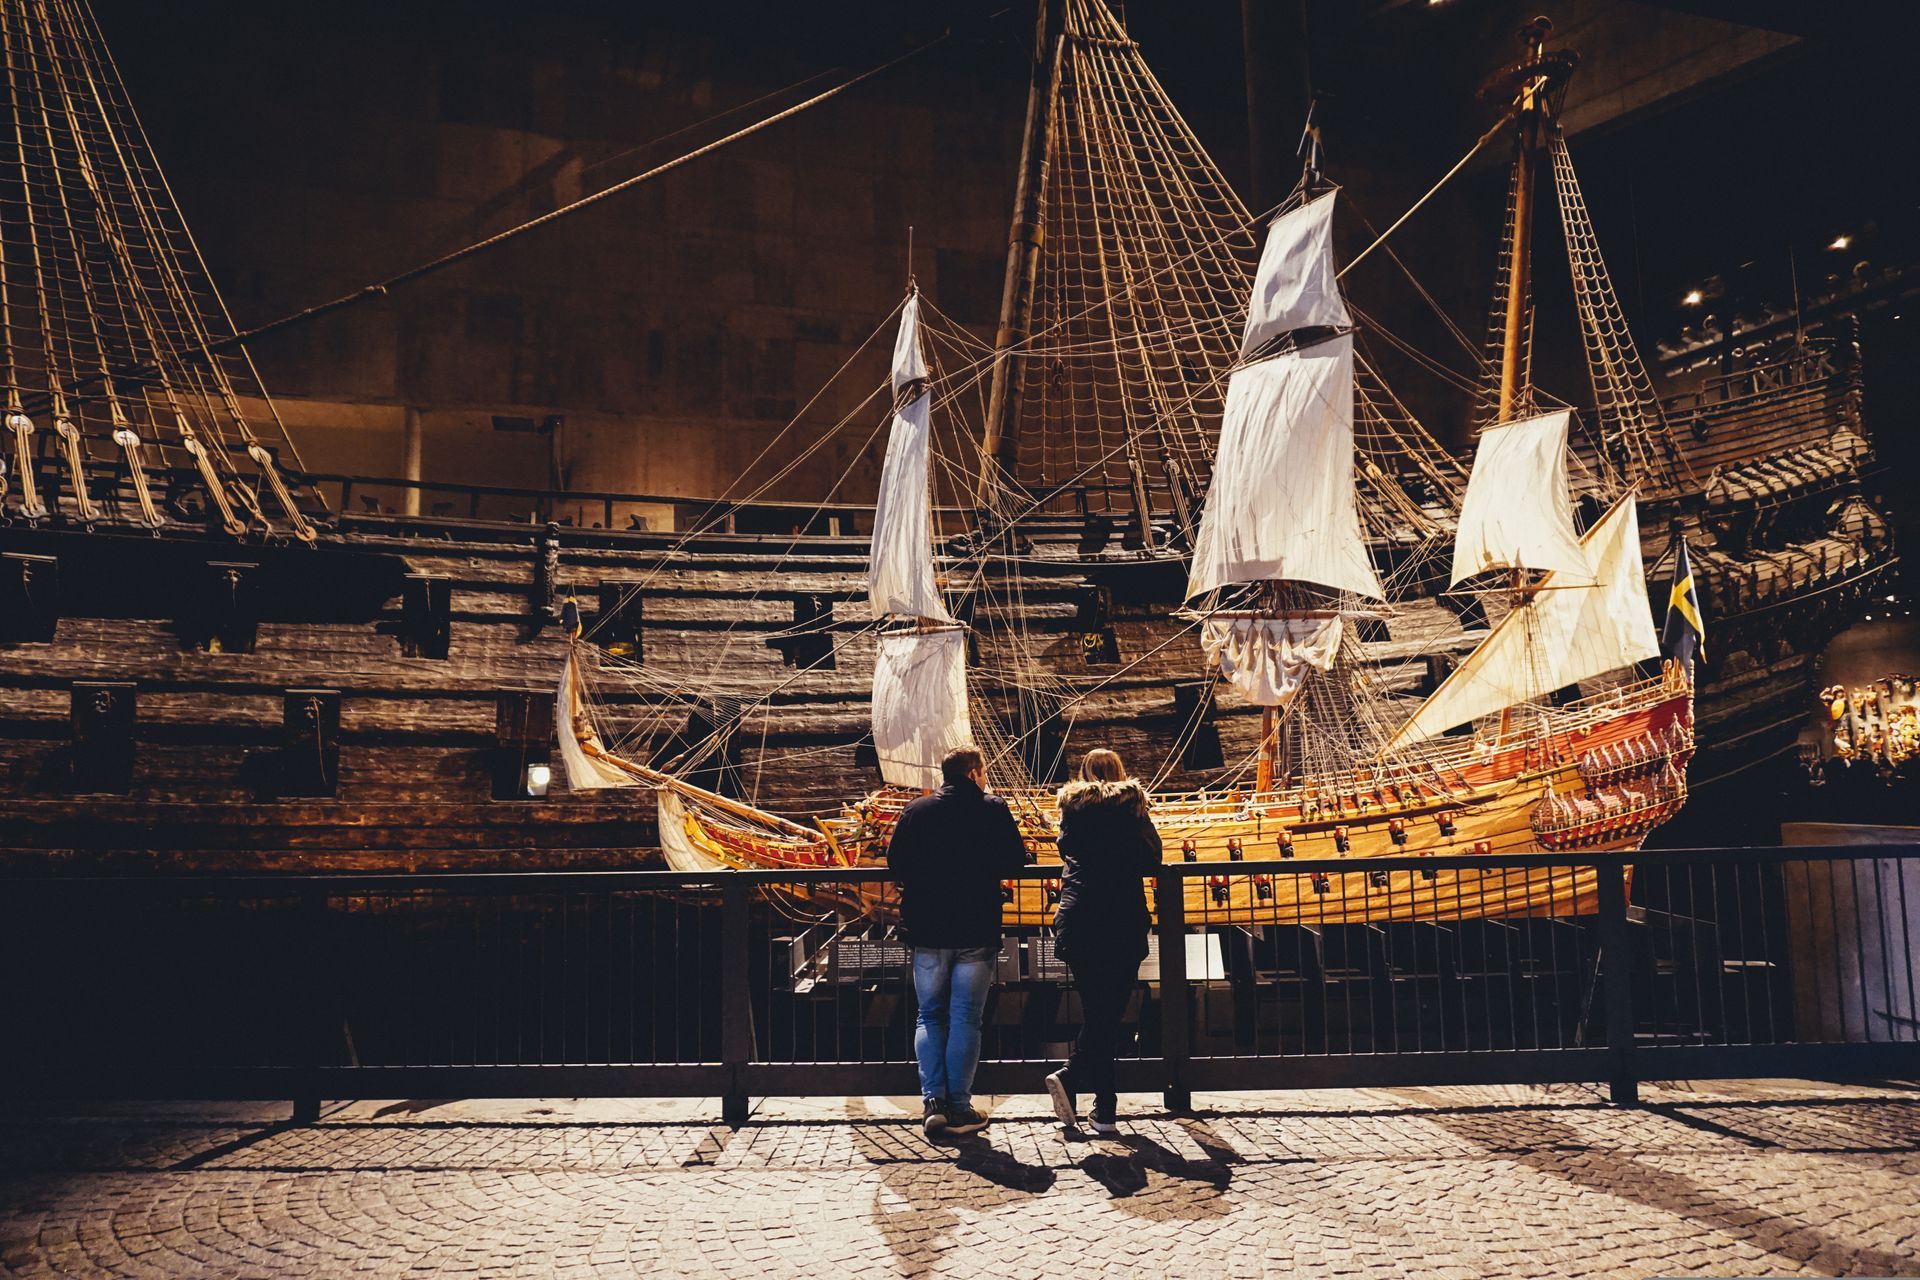 Two visitors at the Vasa museum in Stockholm